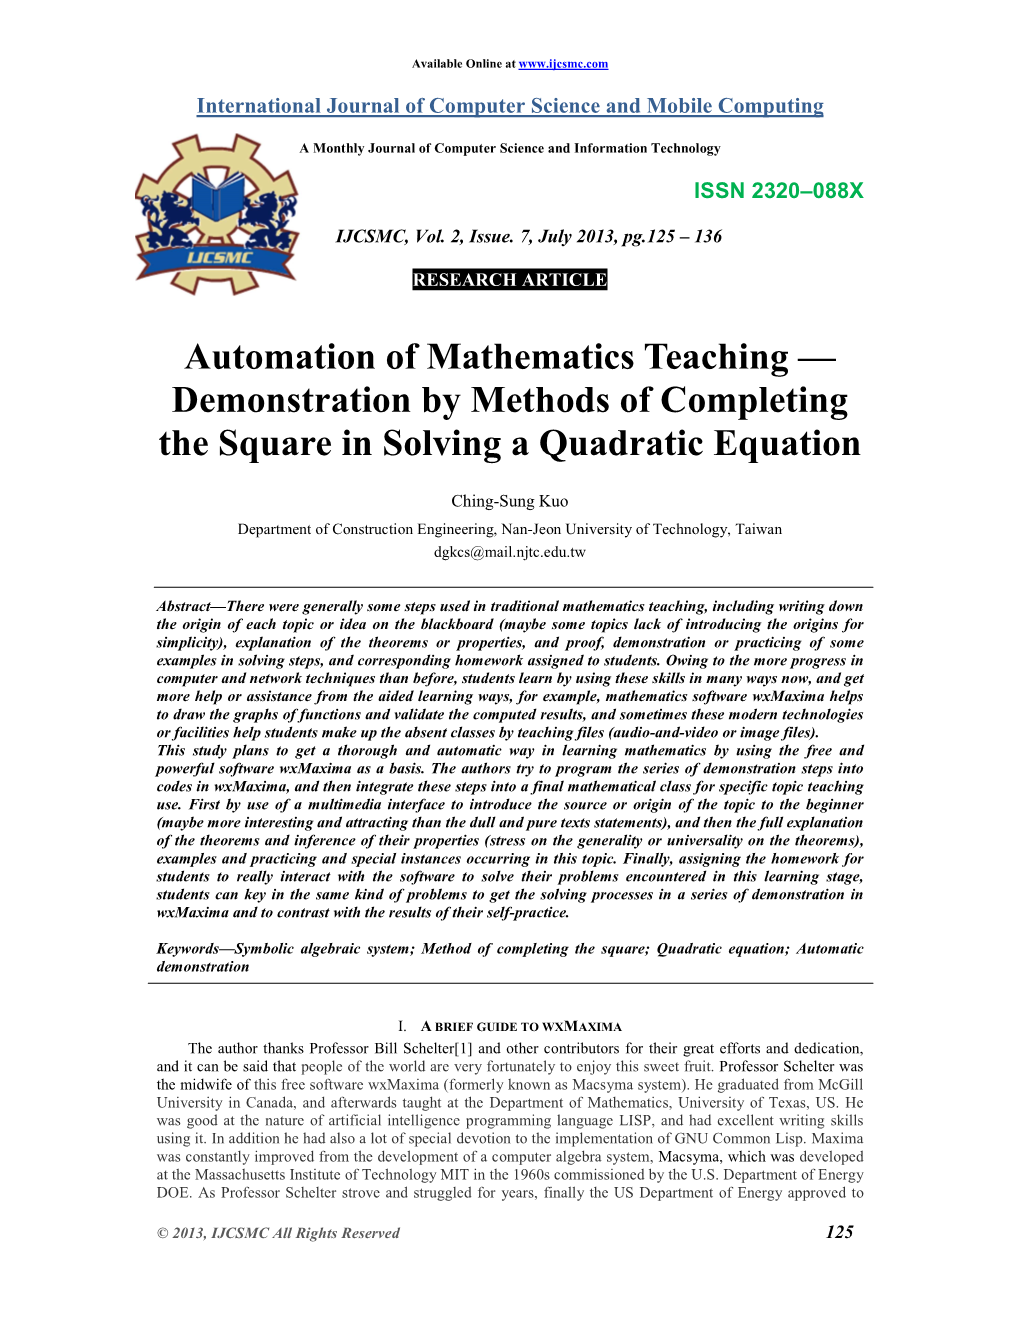 Automation of Mathematics Teaching — Demonstration by Methods of Completing the Square in Solving a Quadratic Equation